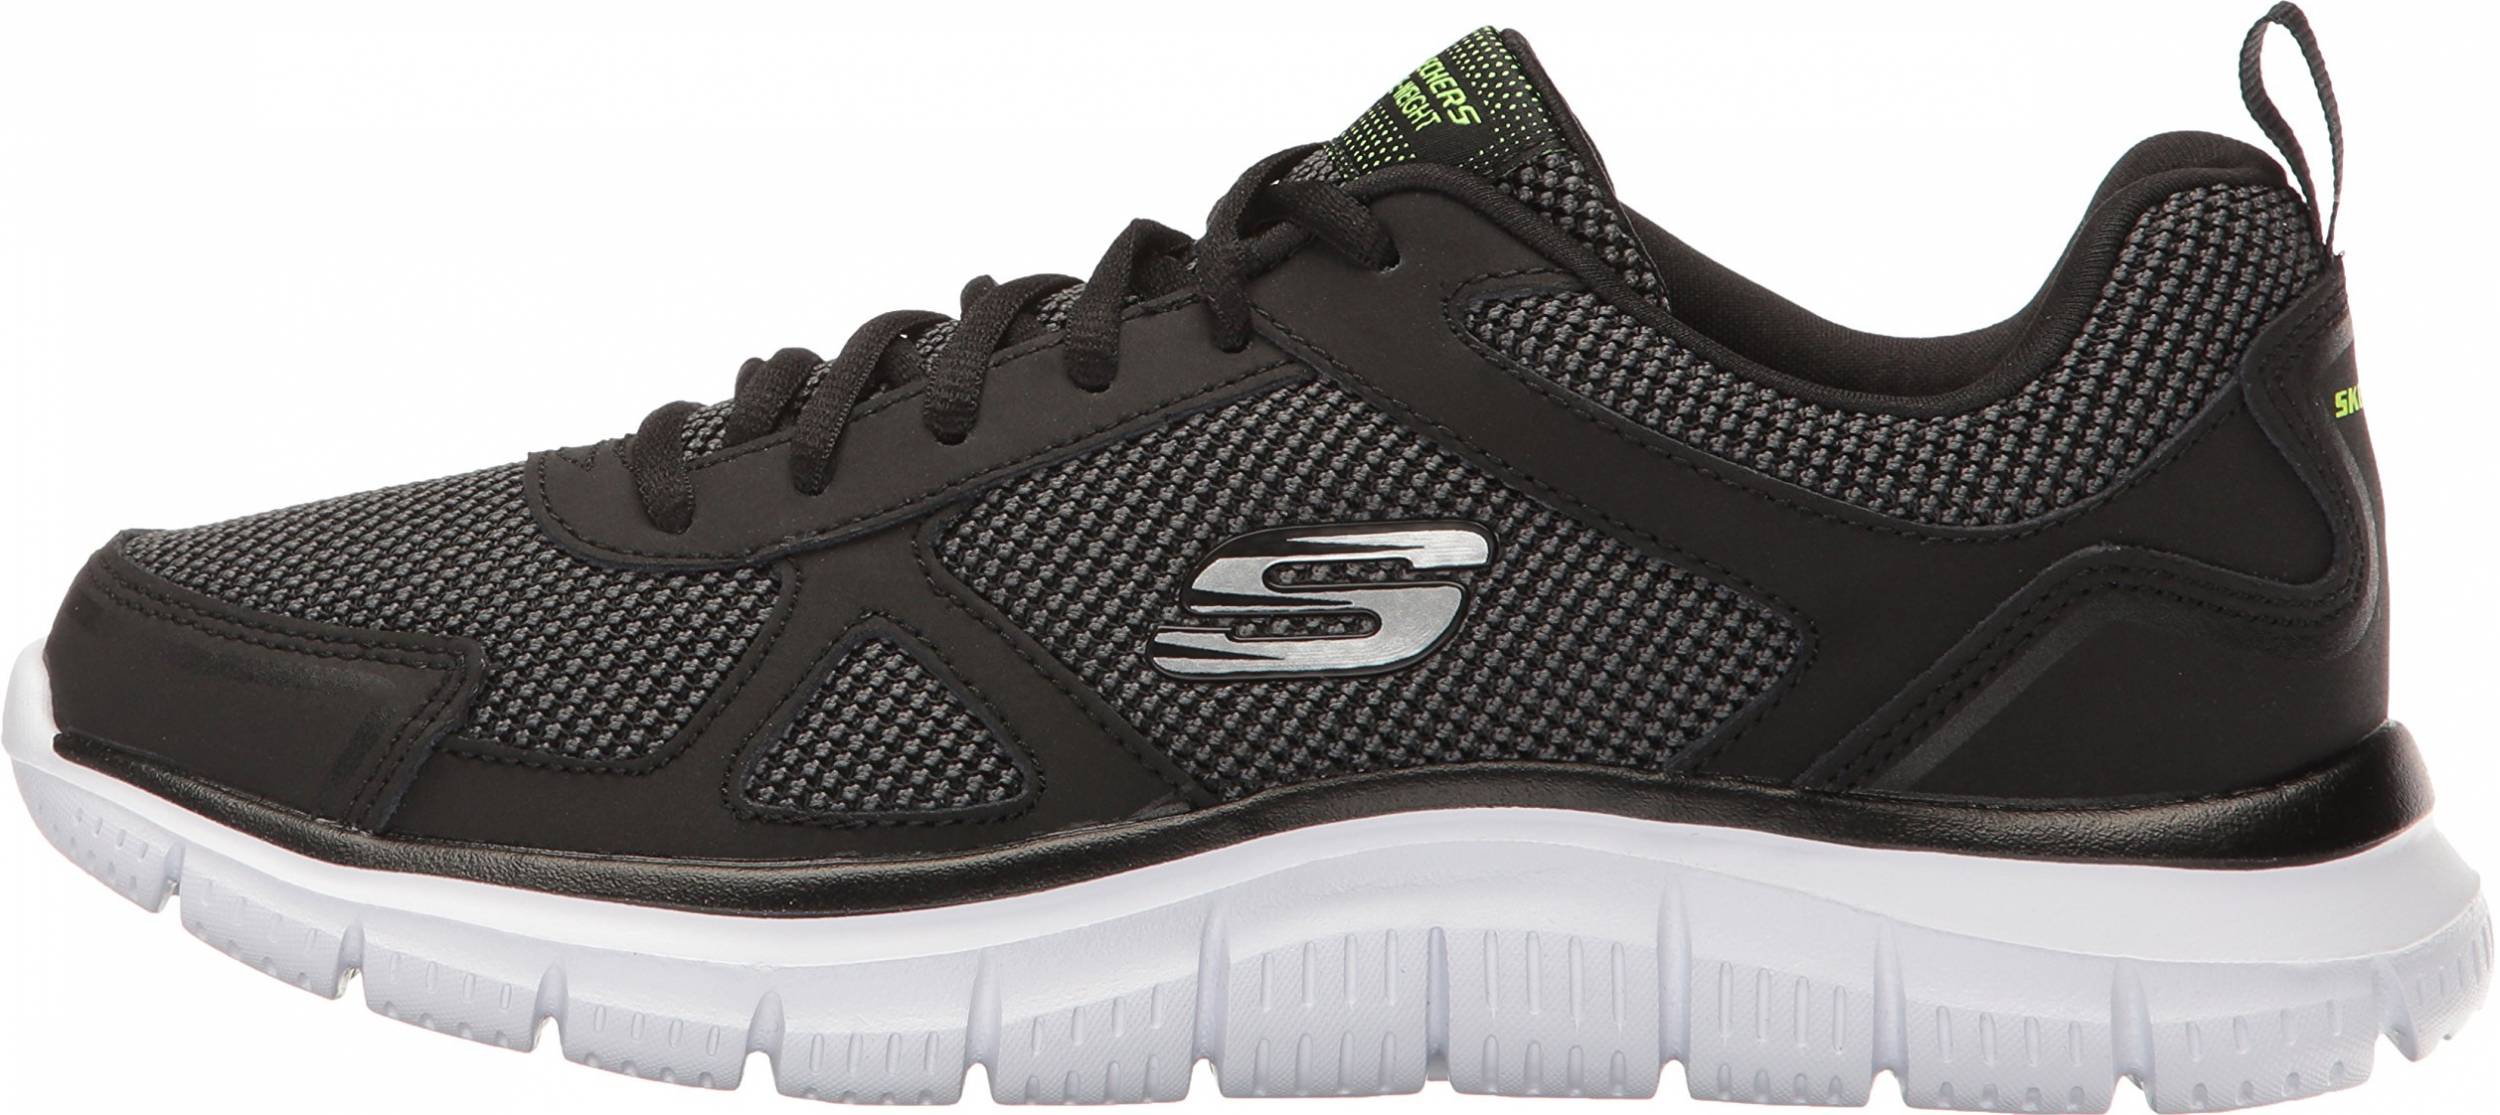 10+ Skechers workout shoes: Save up to 